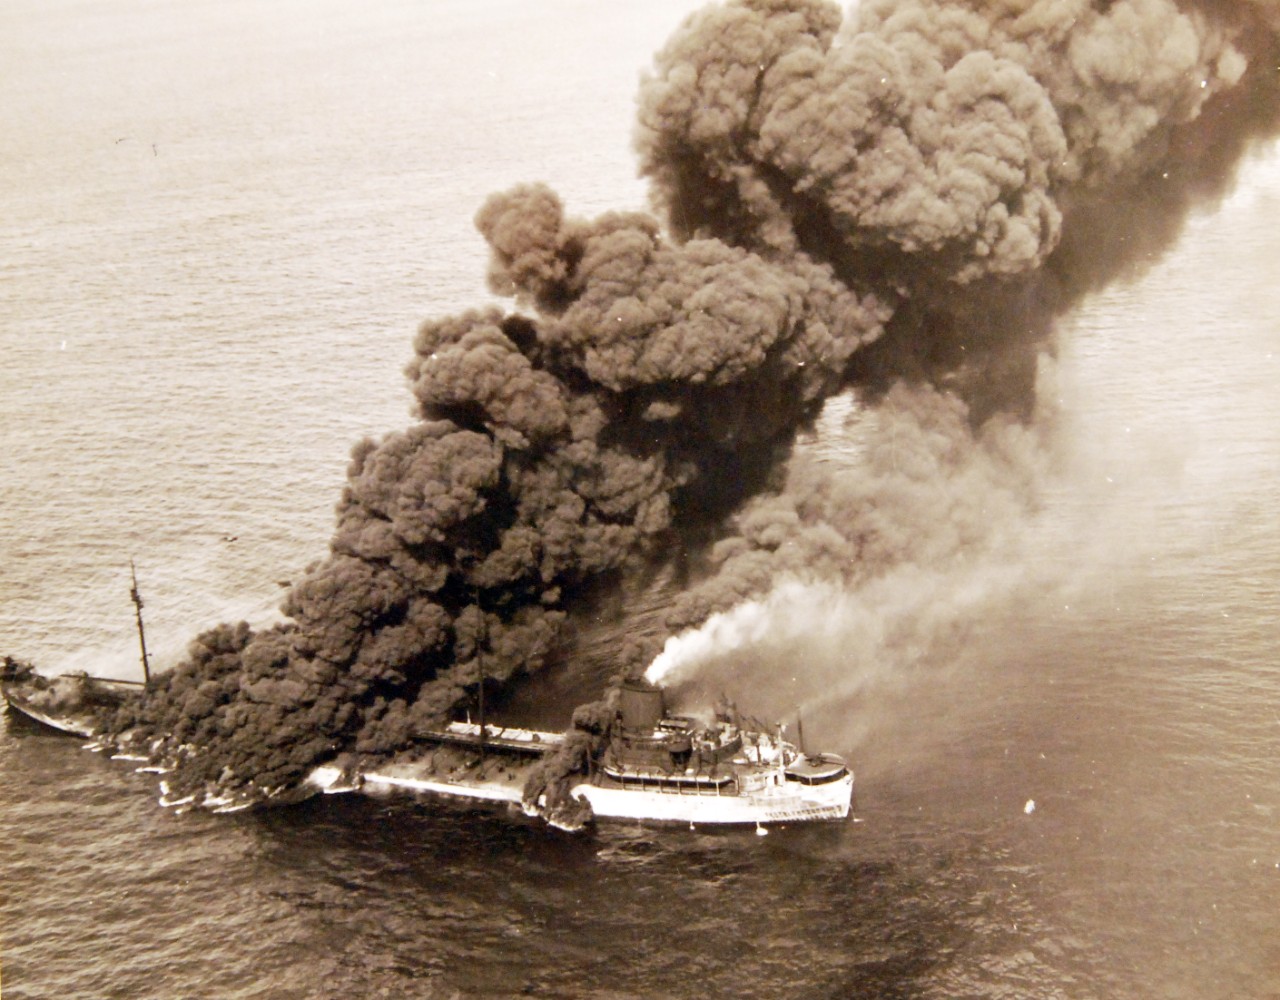 <p>80-G-61573: German U-boat attacks, WWII. SS Pennsylvania Sun burning after being torpedoed amidships by a torpedo by U-571 on July 15, 1942.&nbsp;</p>
